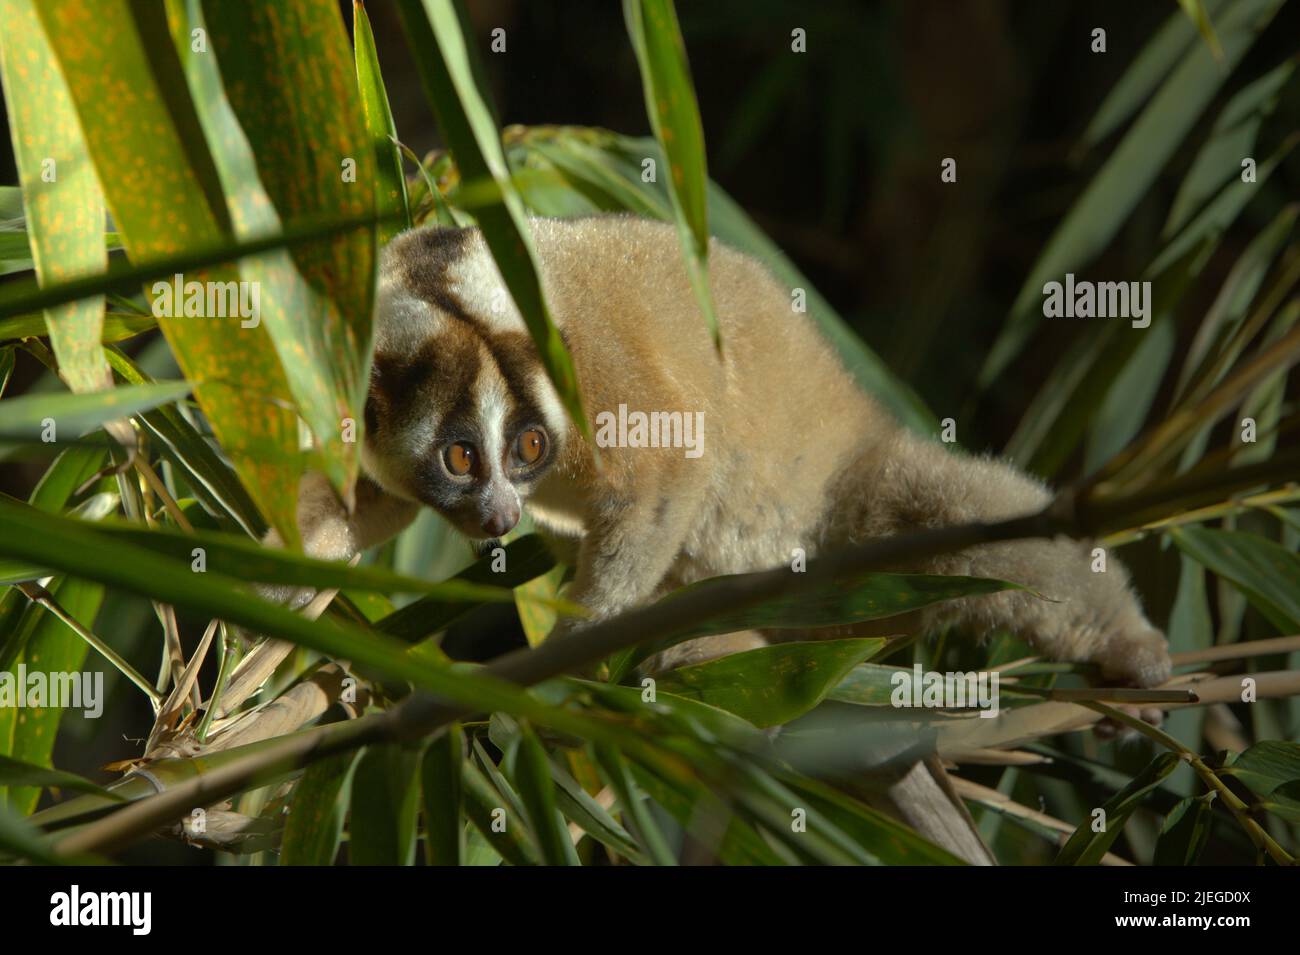 A wild Javan slow loris (Nycticebus javanicus)—a nocturnal, critically endangered primate that is endemic to Java Island—is photographed in daylight in a controlled environment at its natural habitat in Sumedang, West Java, Indonesia. The species is under threat due to wildlife trafficking and habitat loss. The International Union for Conservation of Nature (IUCN) lists javan slow loris as Critically Endangered—only one step away from extinction—in their Red List of Threatened Species. Stock Photo